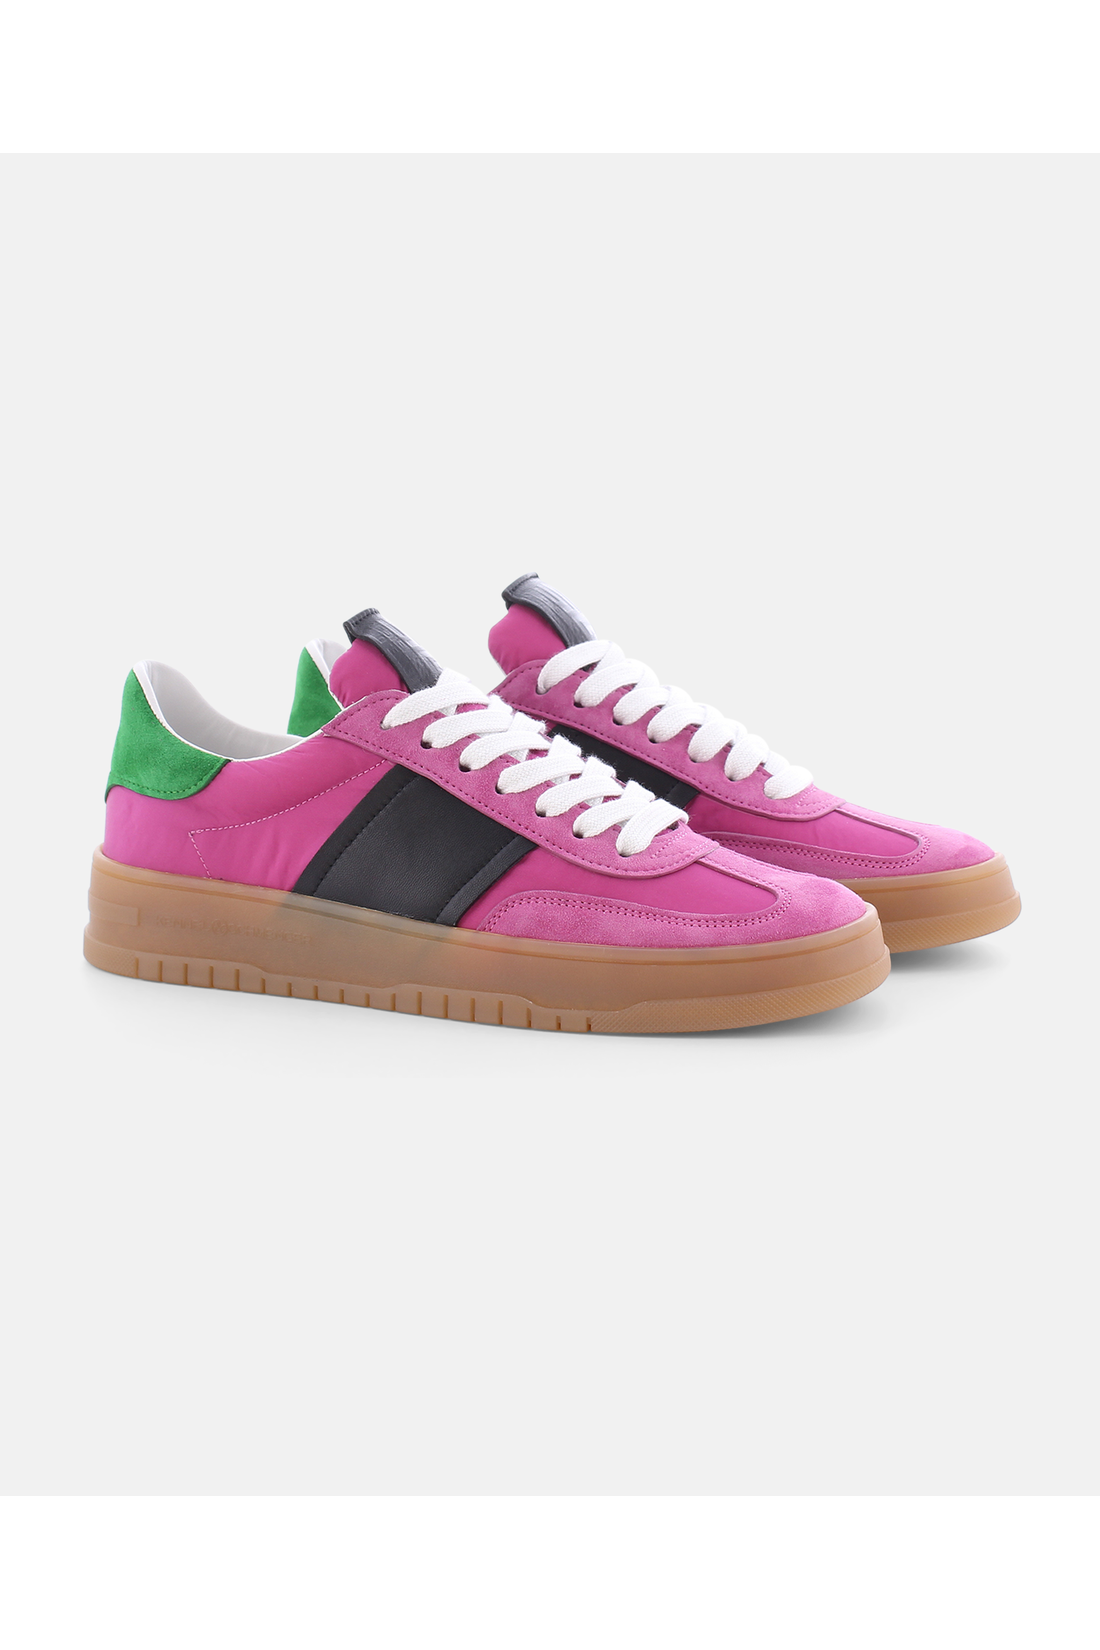 Kennel-Schmenger-OUTLET-SALE-DRIFT-Sneakers-4-37-ARCHIVE-COLLECTION.png